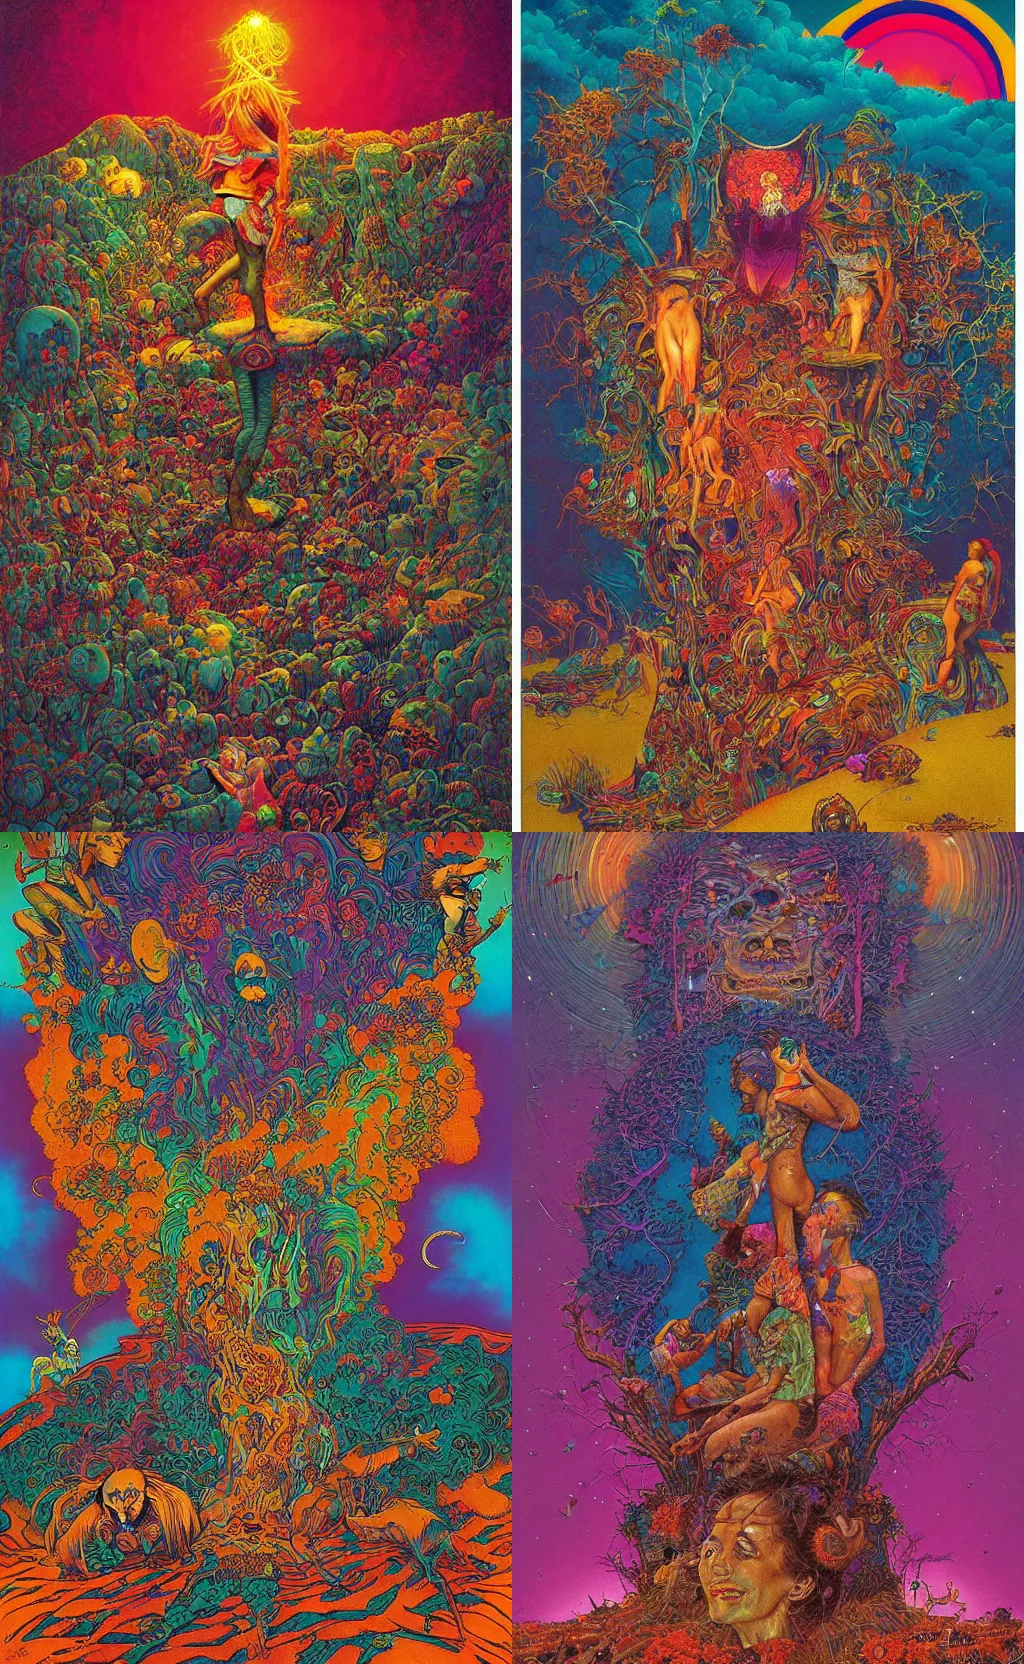 Prompt: the works of lisa frank and beksinski by norman rockwell in the style of dan mumford